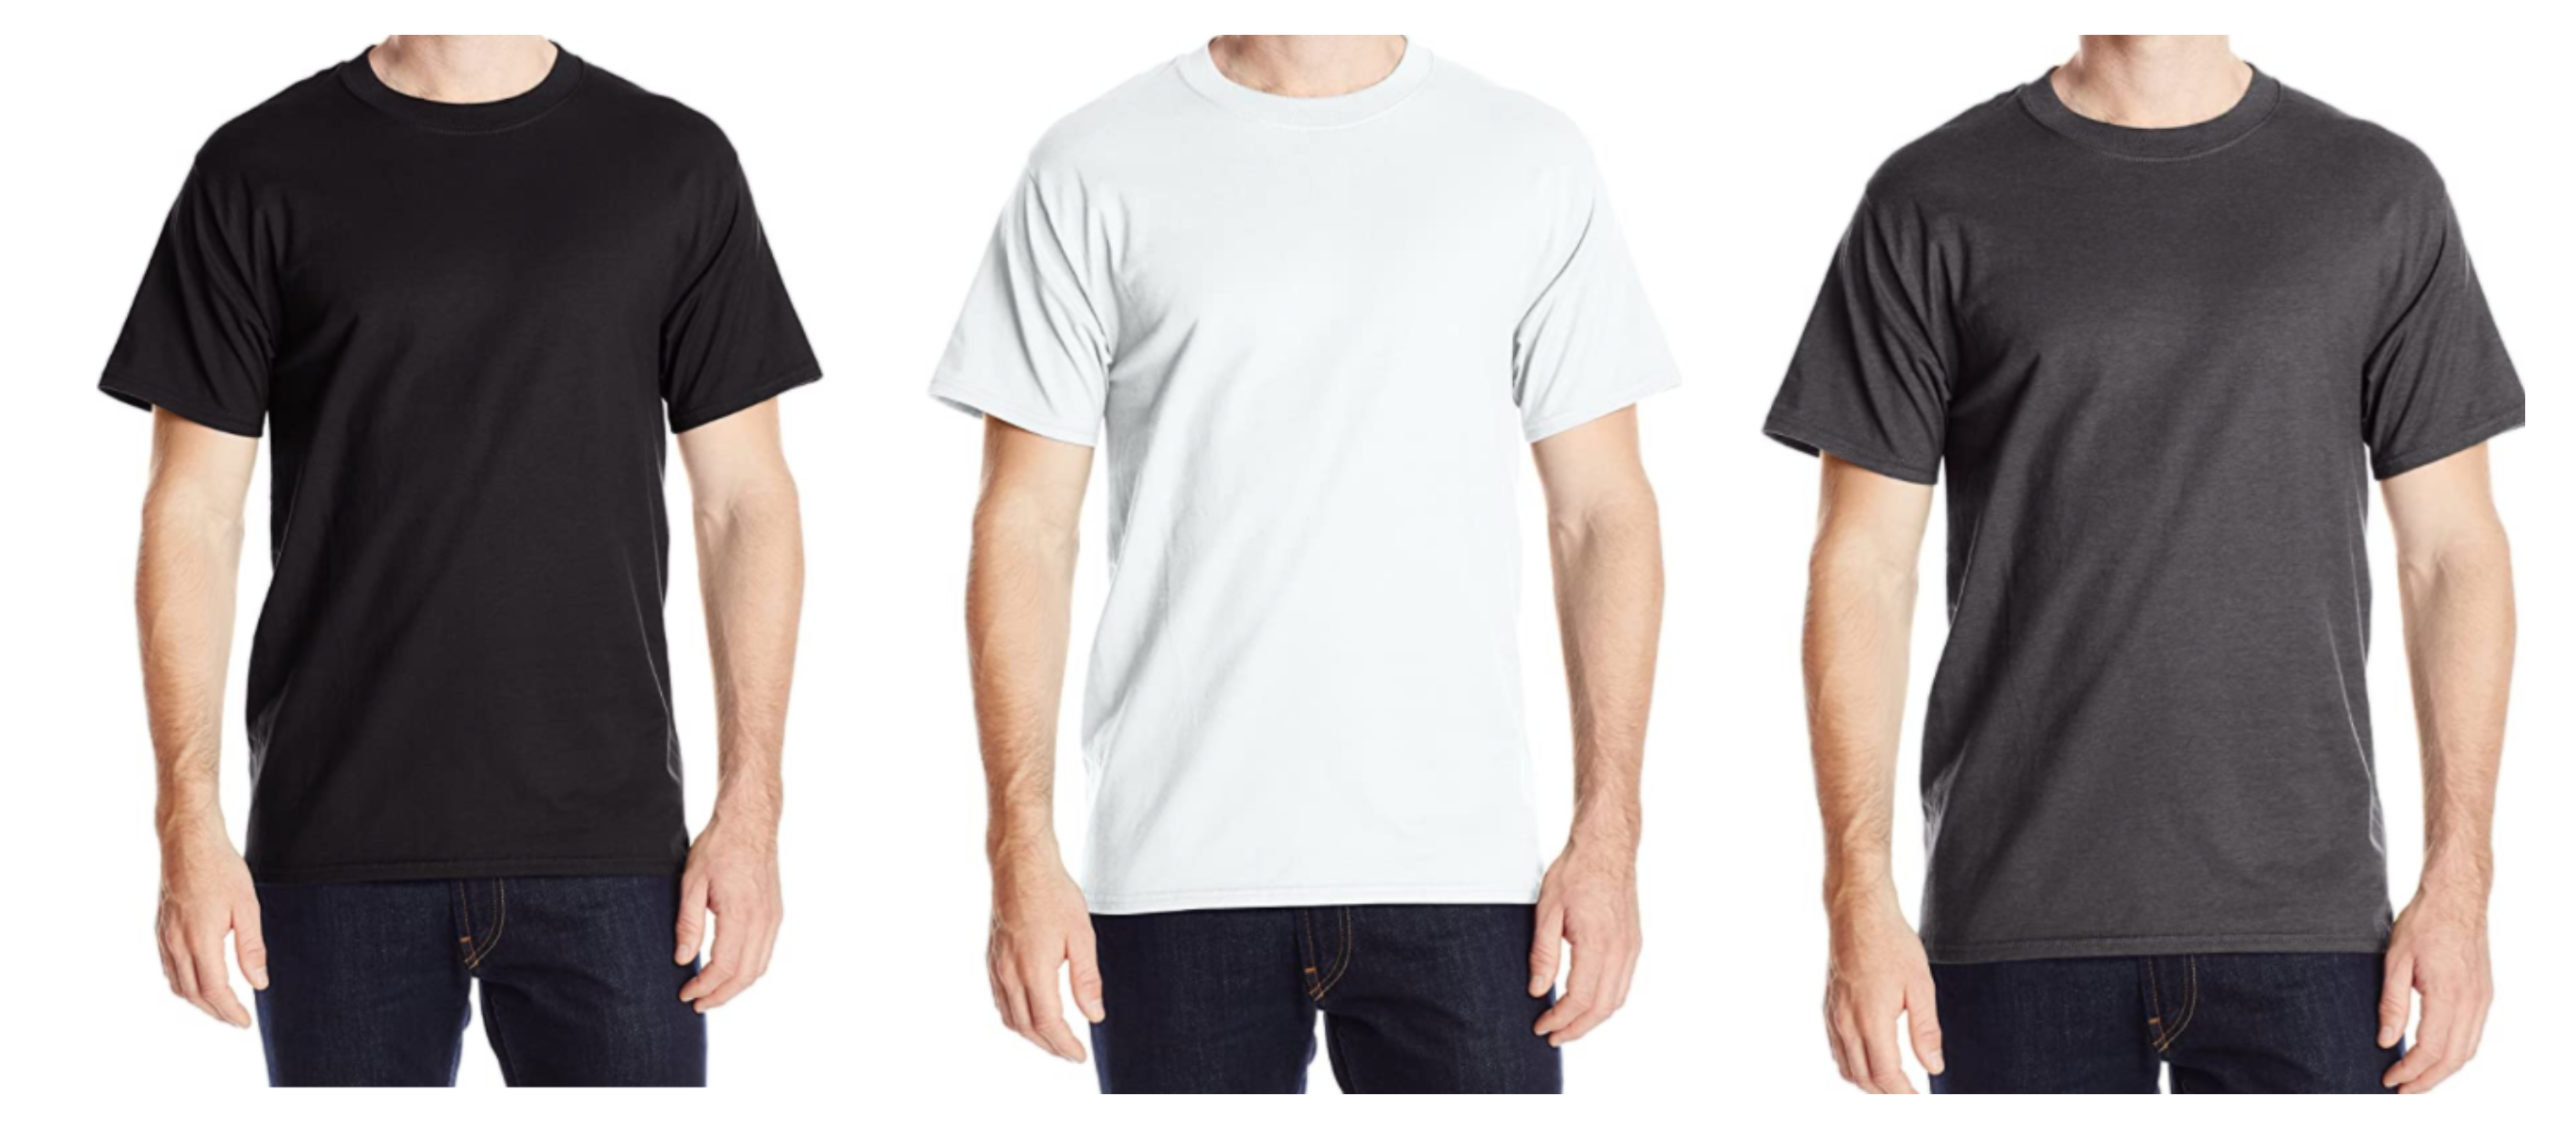 Hanes Men’s Short Sleeve Beefy T-Shirt for Only $3.60 (Was $6.50 ...